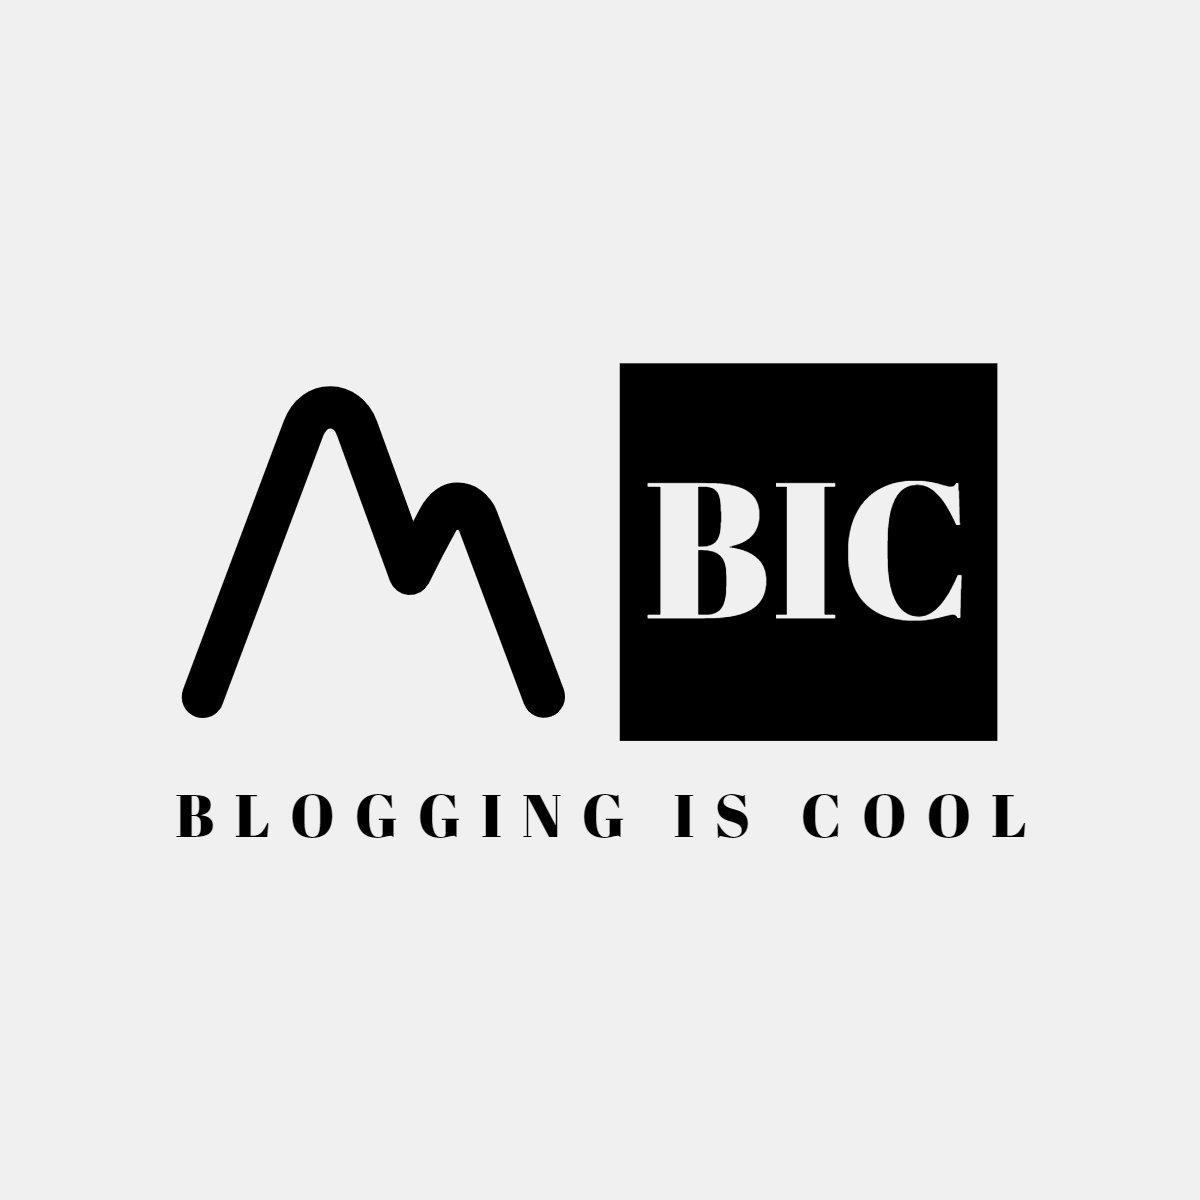 Bloggingiscool.com How to develop a course and sell it for more income